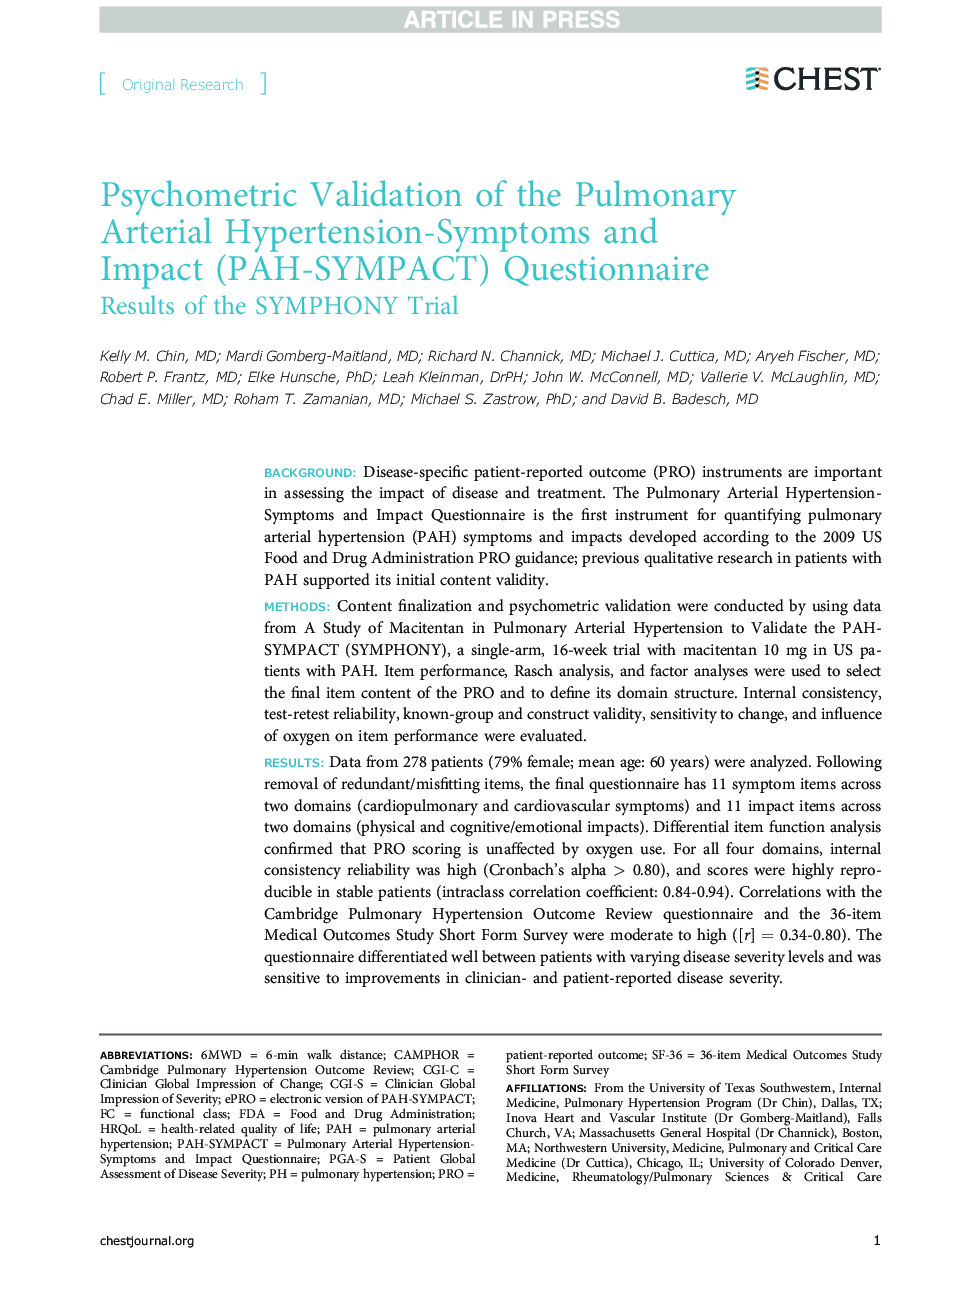 Psychometric Validation of the Pulmonary Arterial Hypertension-Symptoms and Impact (PAH-SYMPACT) Questionnaire